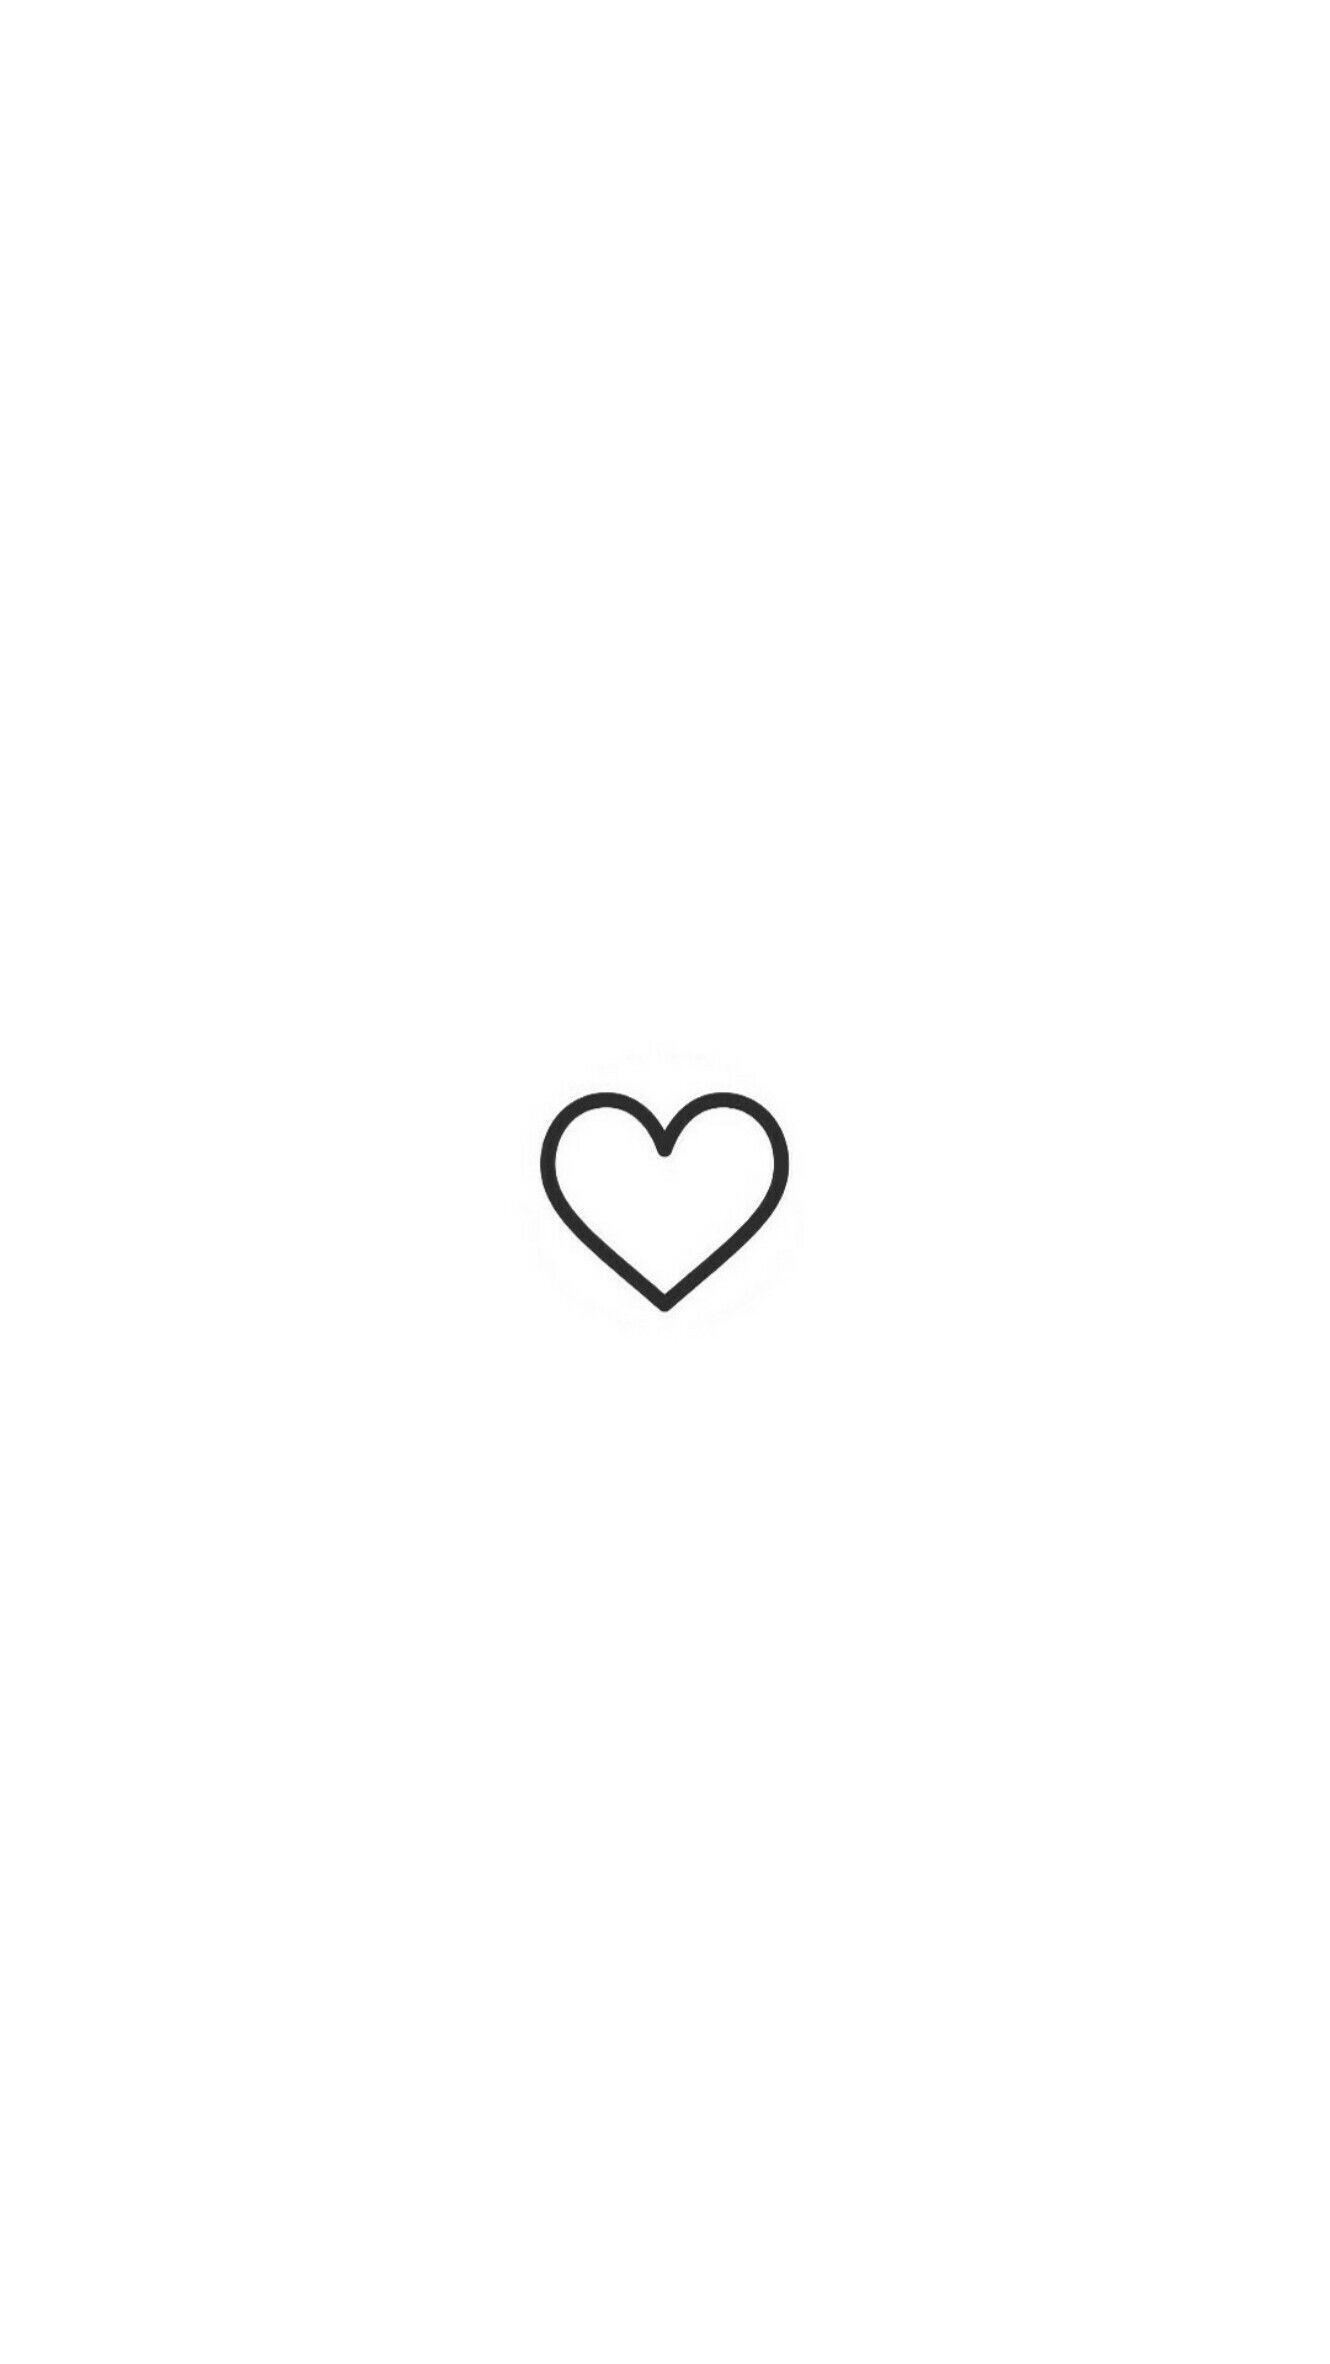 Cute Black and White Instagram Logo - highlights #highlight #instagram #insta #feed #feedinsta